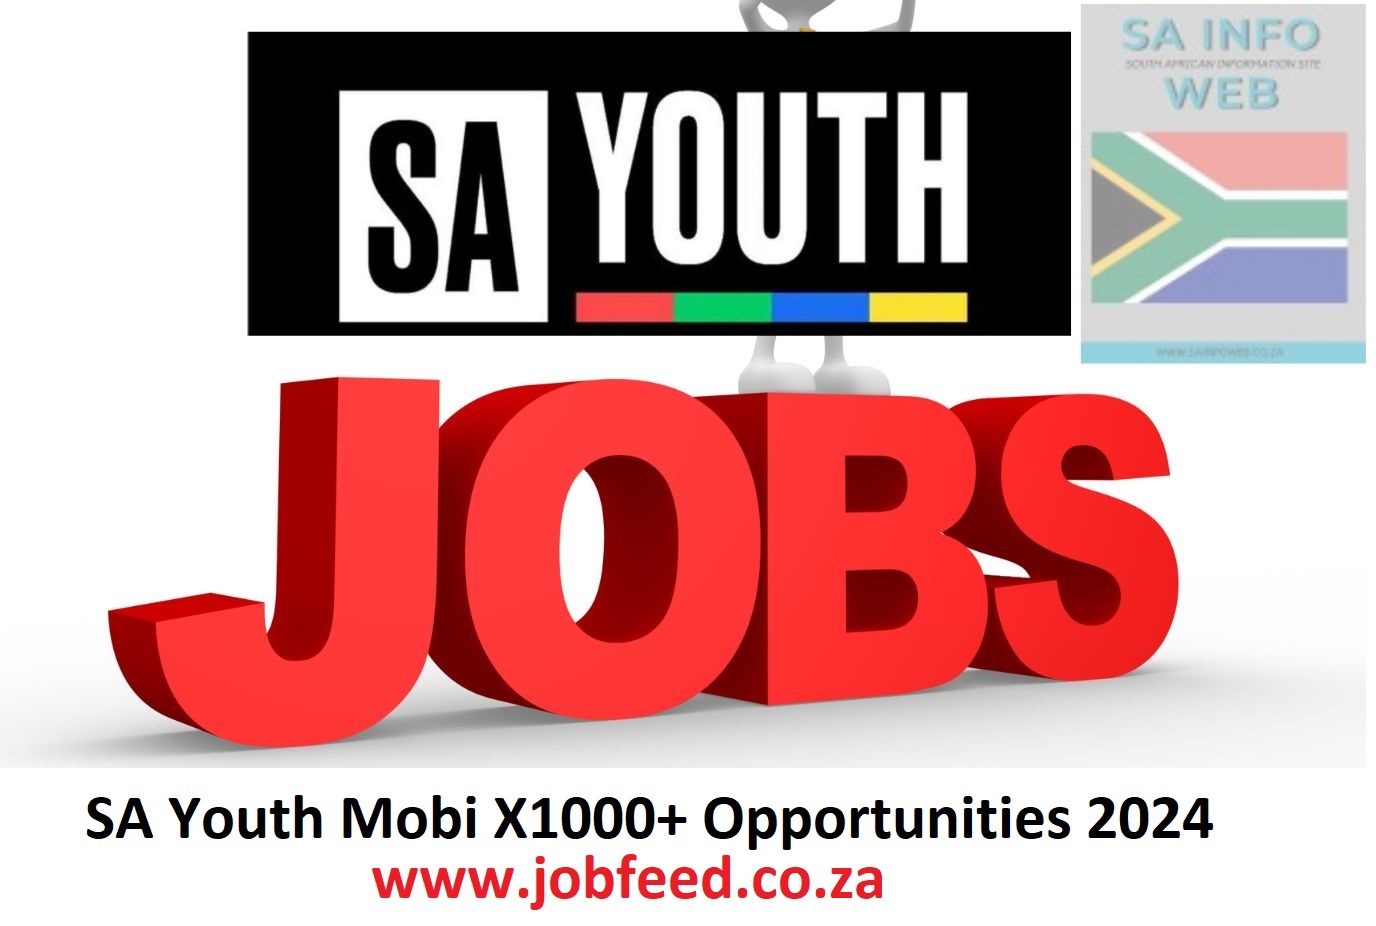 SA Youth Mobi X1000+ Opportunities 2024